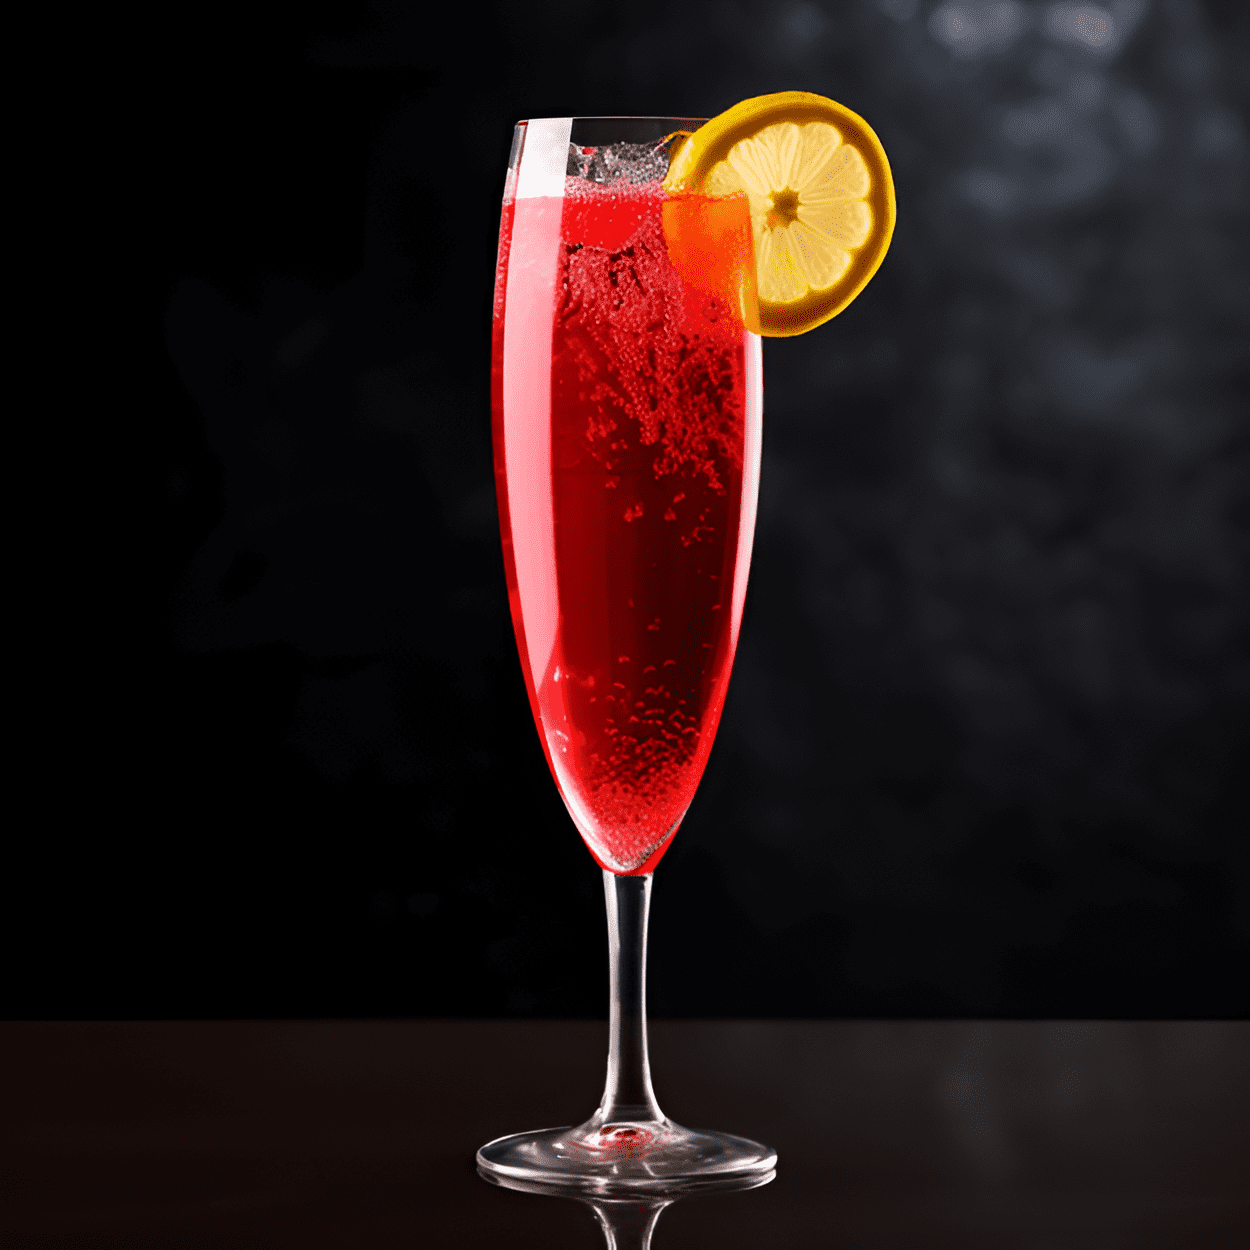 Ambrosia Cocktail Recipe - The Ambrosia cocktail is a delightful blend of sweet, fruity, and bubbly. The apple brandy adds a rich, sweet flavor, while the raspberry syrup gives it a fruity tang. The champagne adds a bubbly, effervescent quality that lightens the drink and makes it perfect for celebrations.